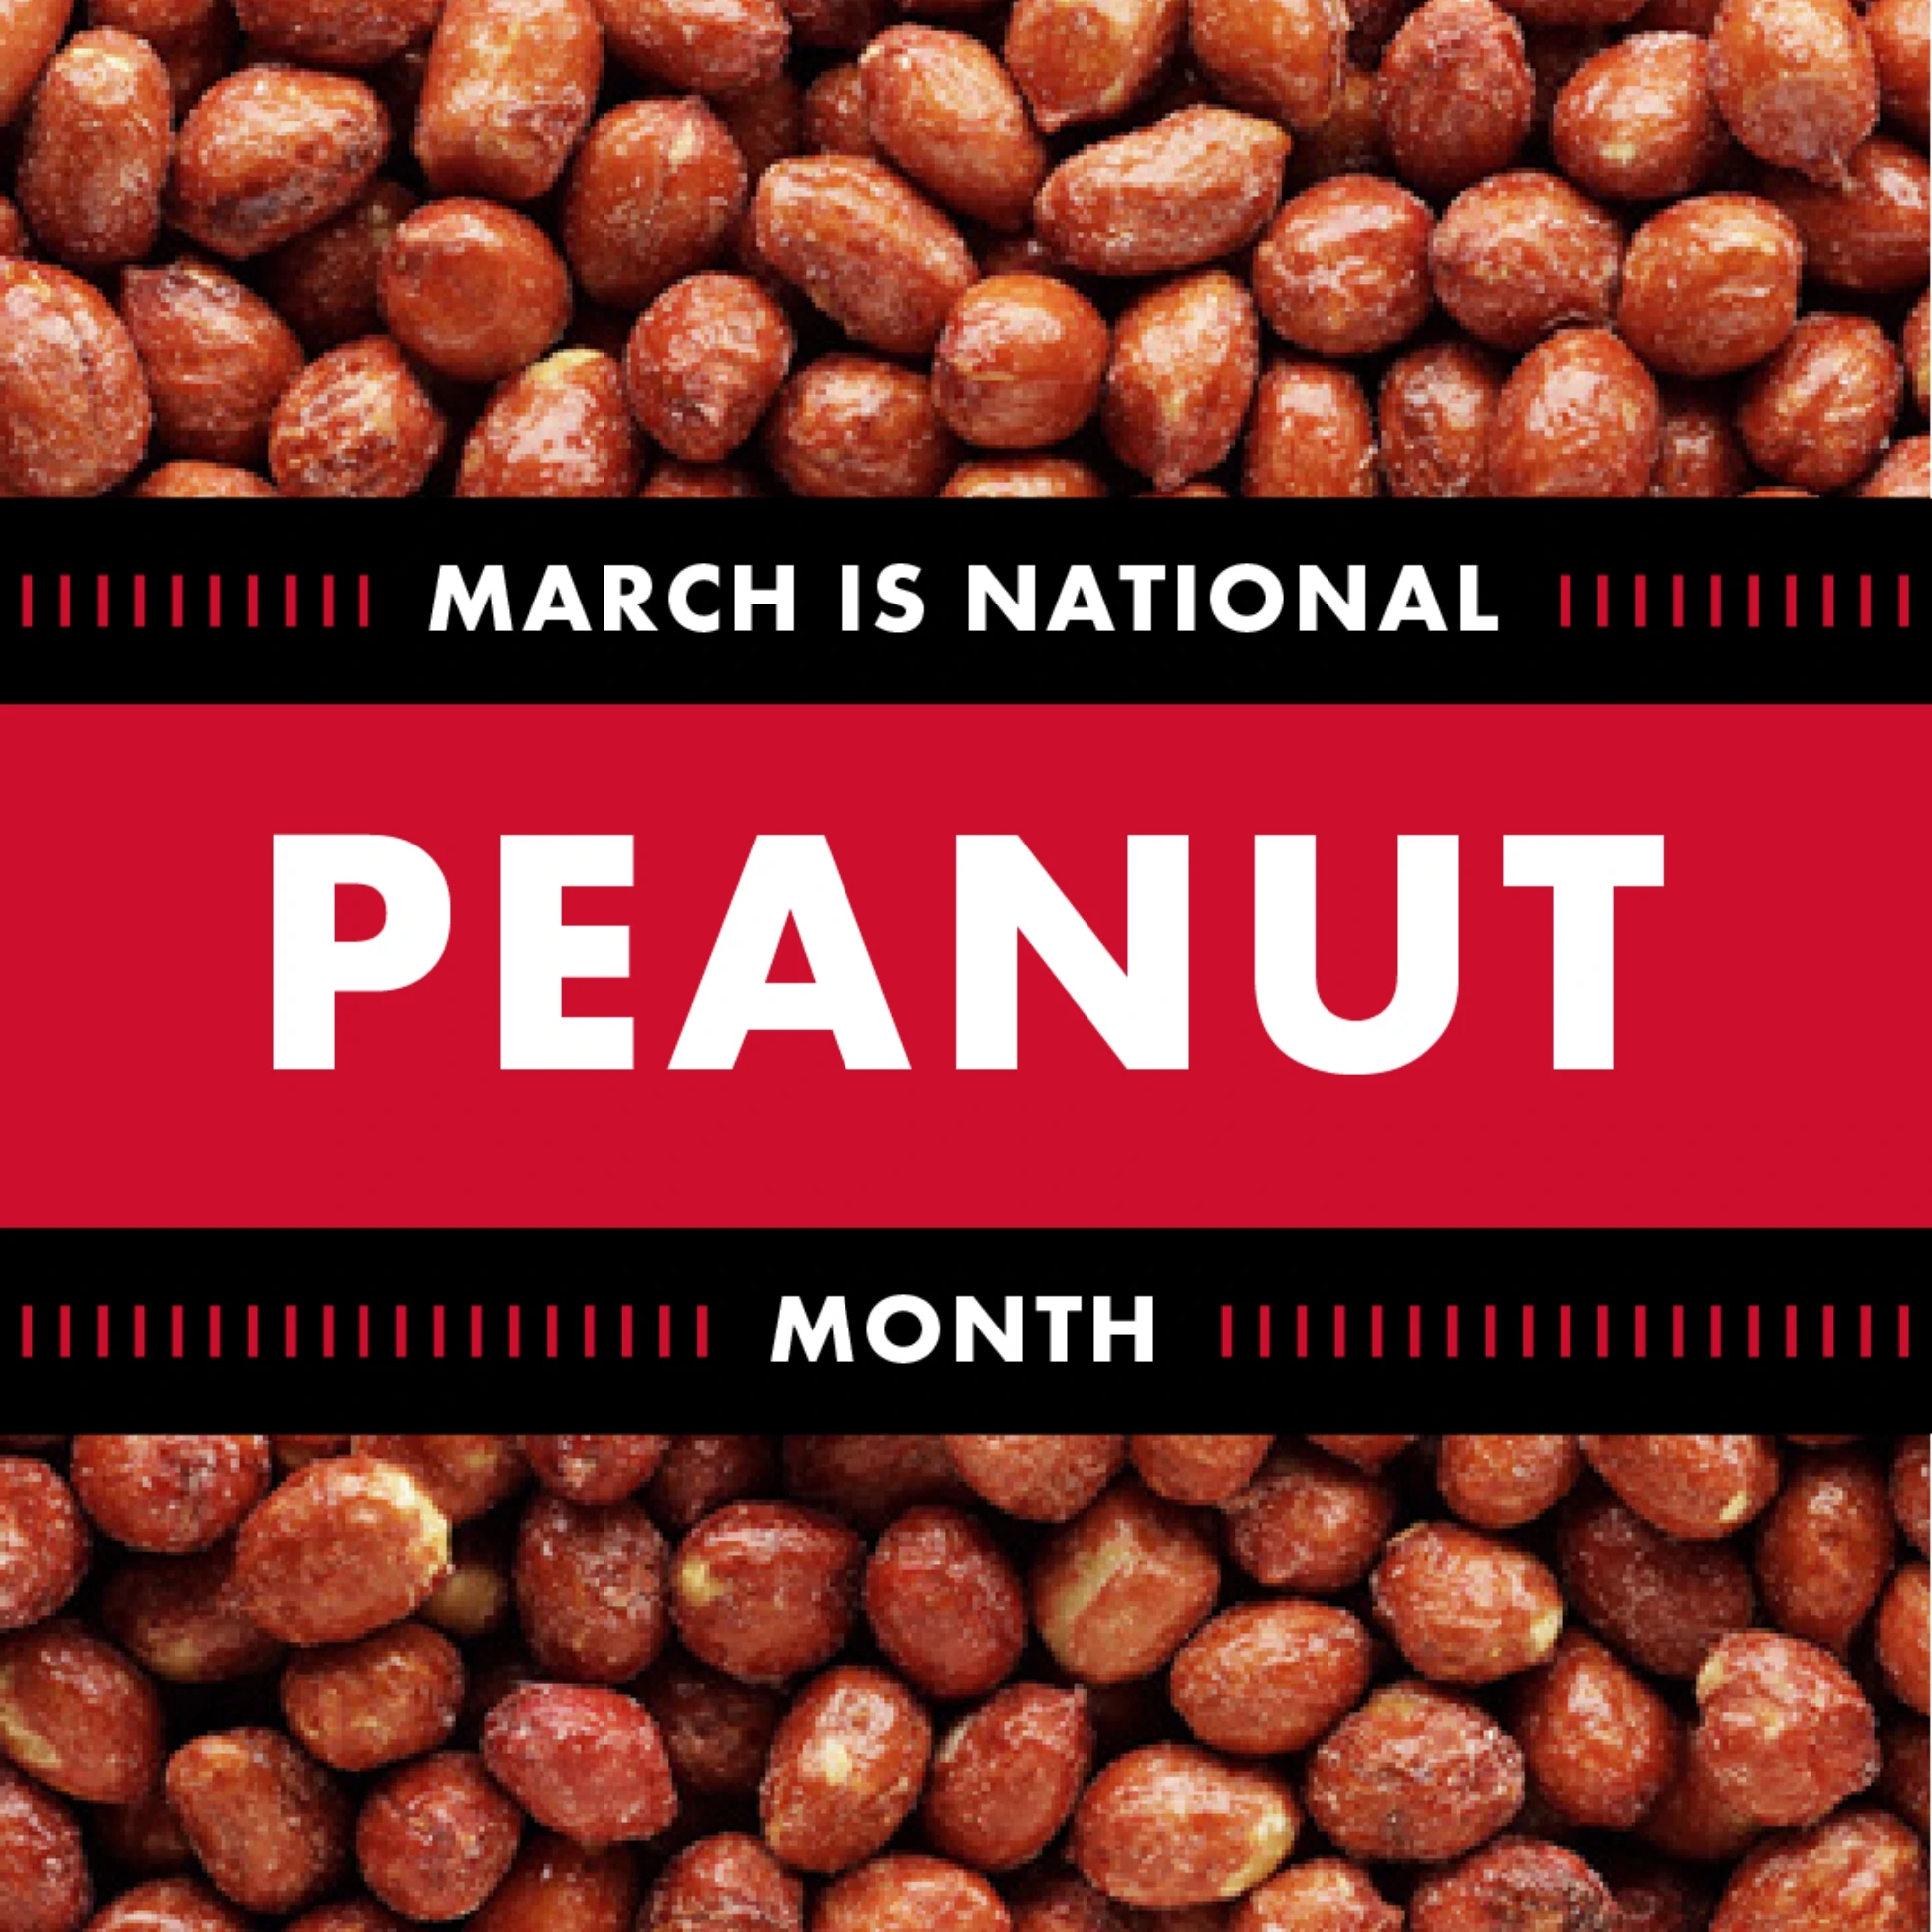 March is national peanut month.